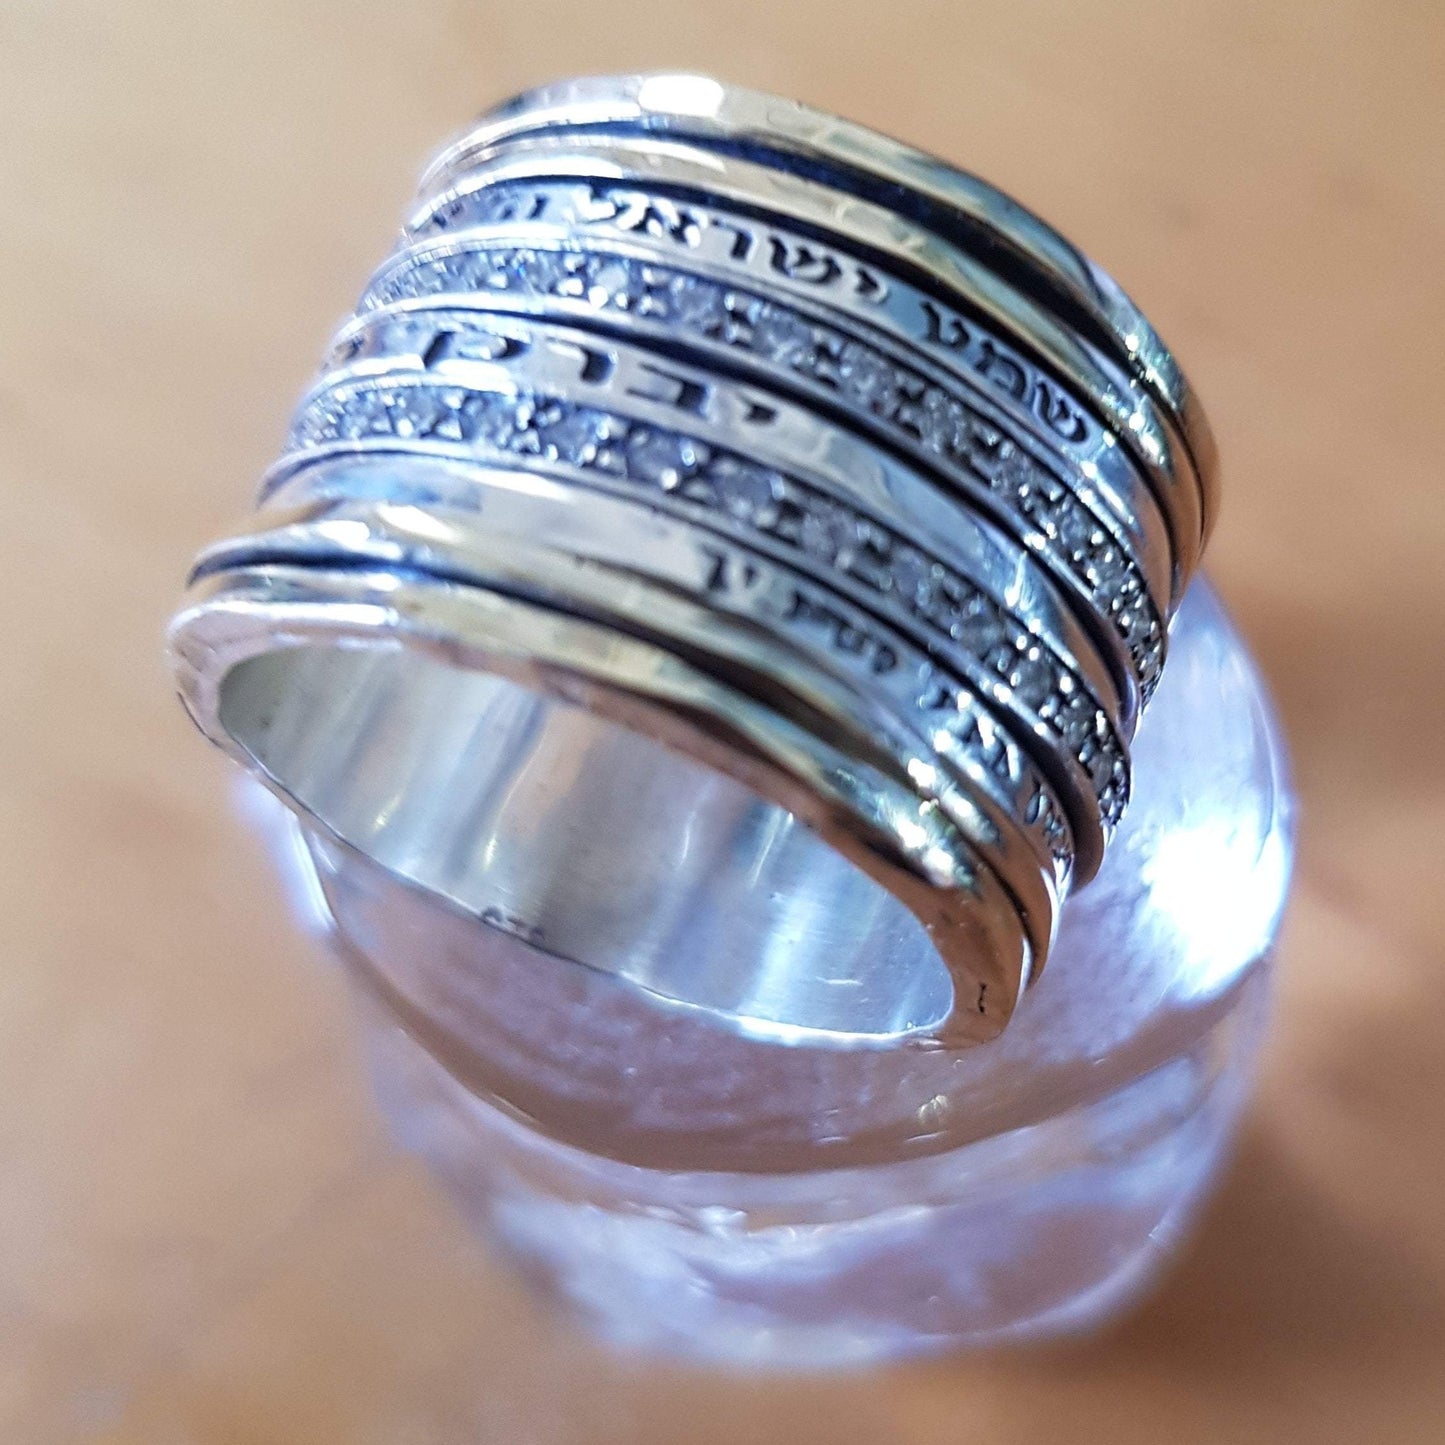 Bluenoemi Jewelry Spinner Rings Israeli spinner rings | Rings for Woman | Bluenoemi israeli jewelry | Engraved Personalized Meditation Ring with Blessings / Quotes